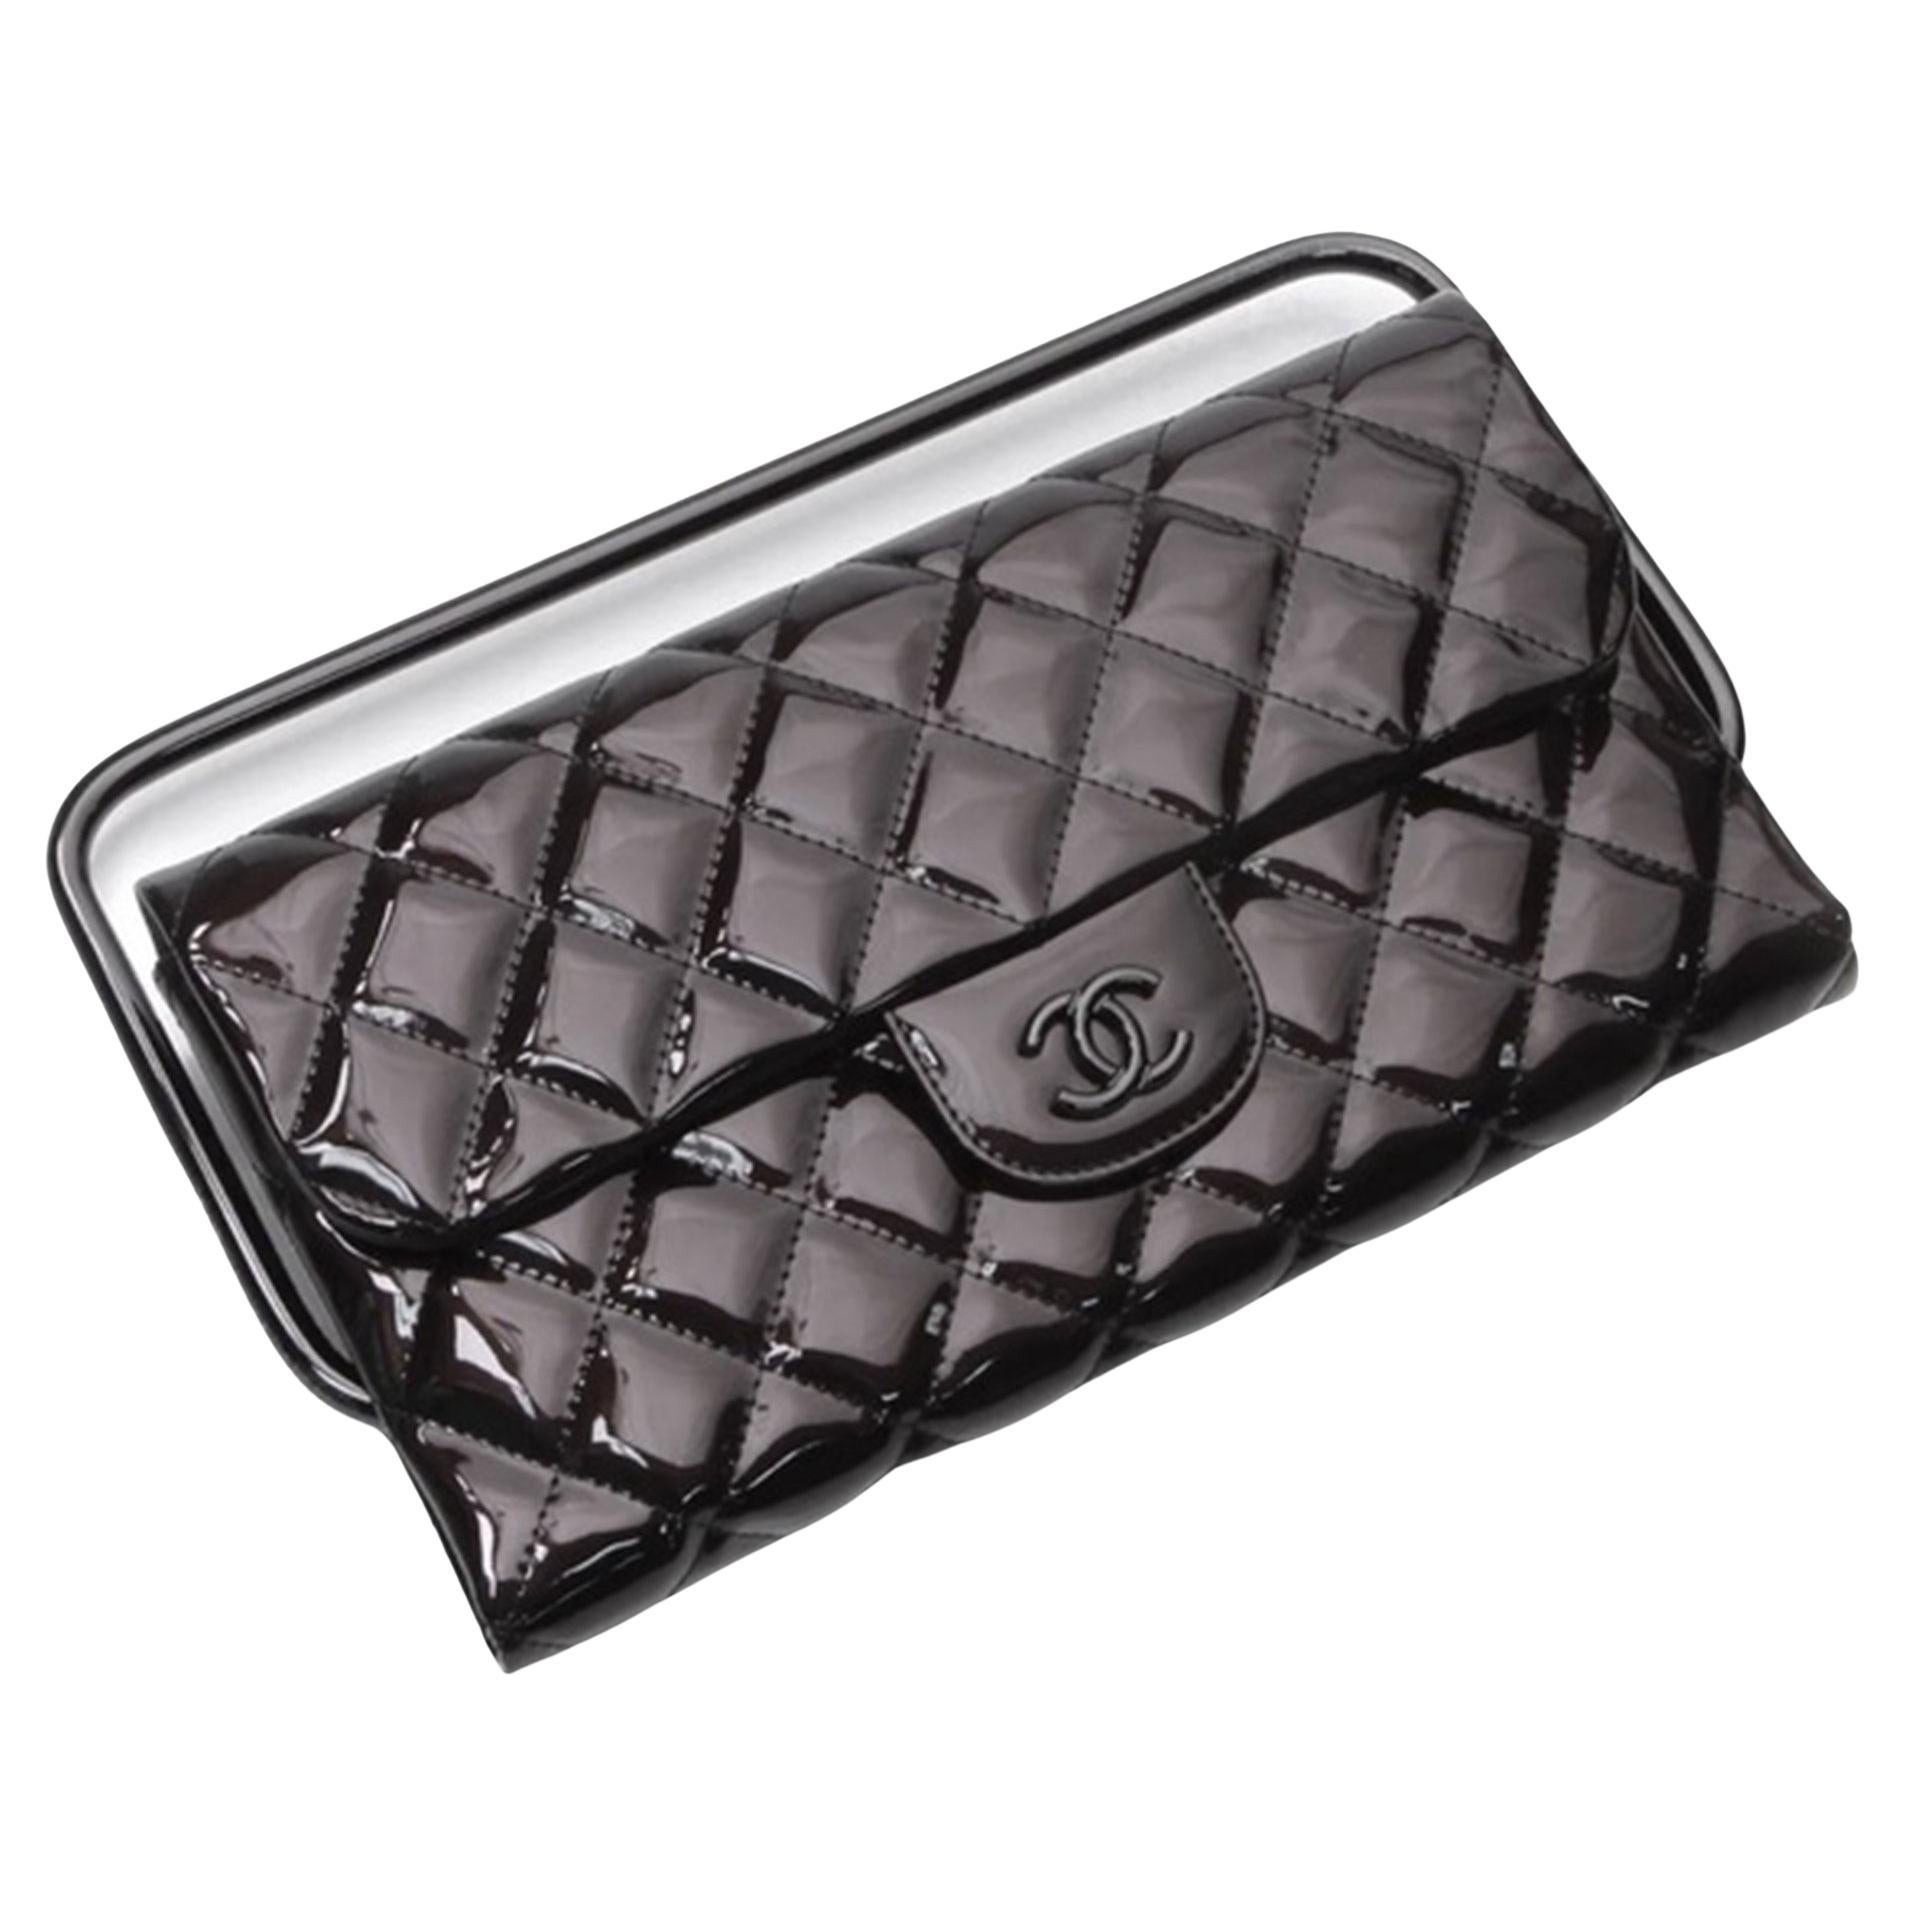 chanel black and white clutch purse